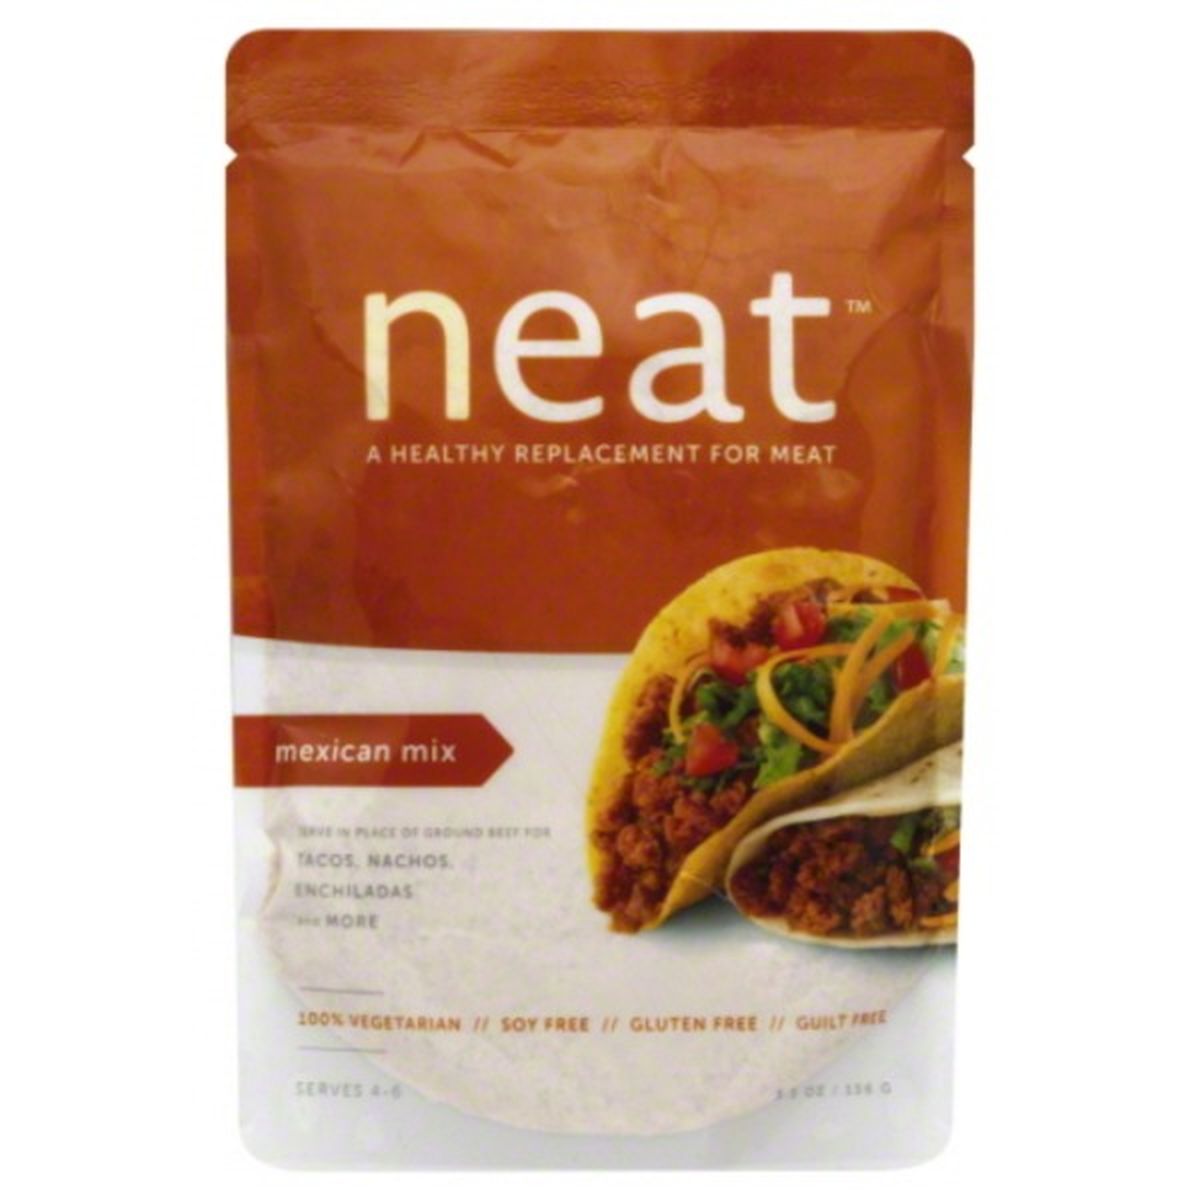 Calories in neat Replacement for Meat, Healthy, Mexican Mix